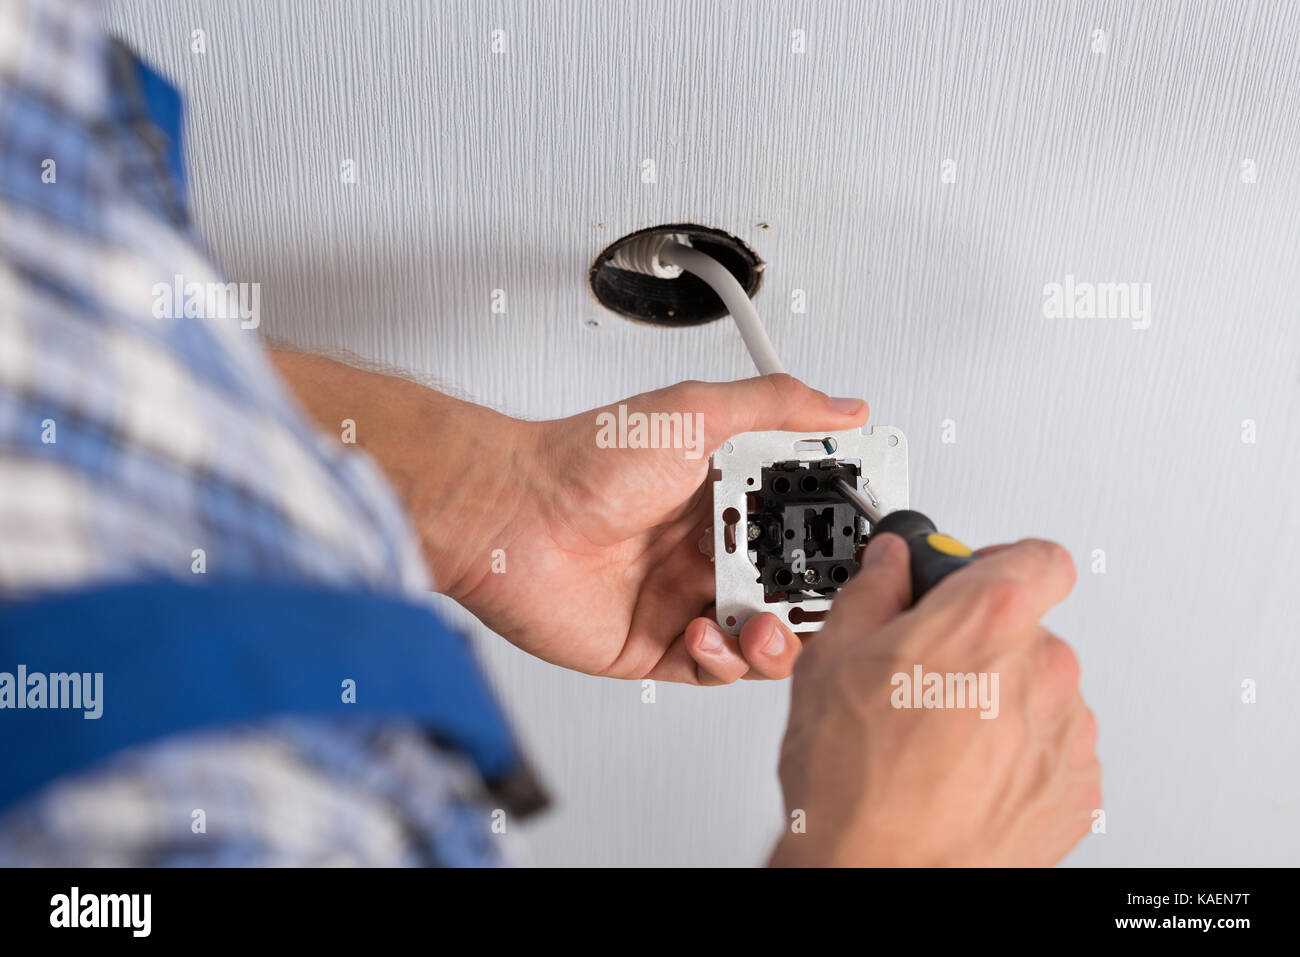 Close-up Of Electrician Hands With Screwdriver Installing Wall Socket Stock Photo